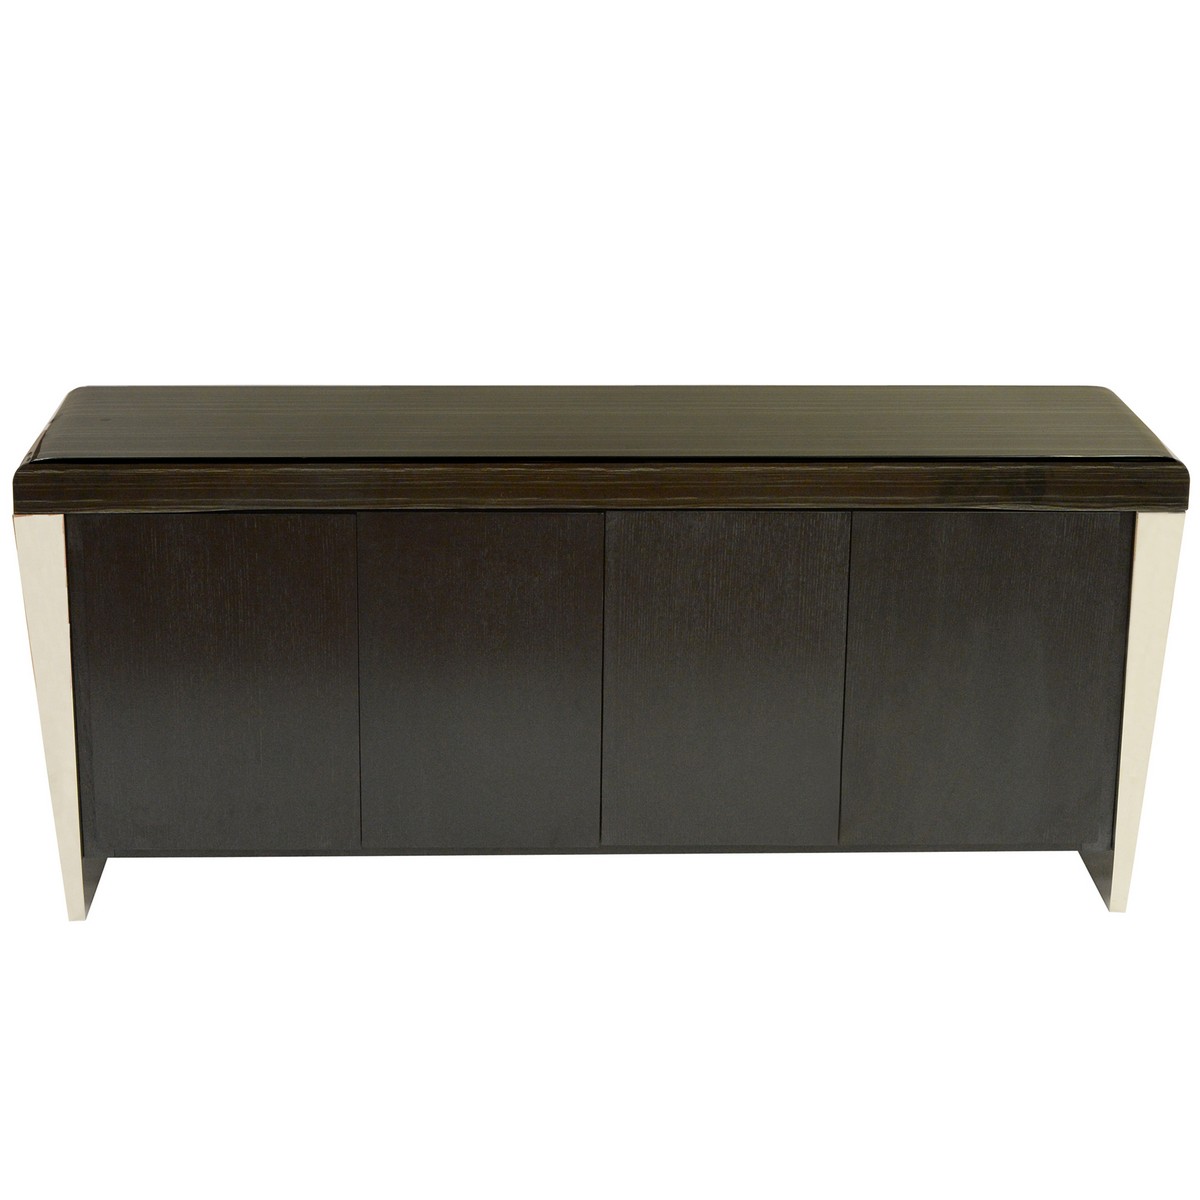 Armen Living Chow Contemporary Marble Buffet Table in Black and Stainless Steel Finish